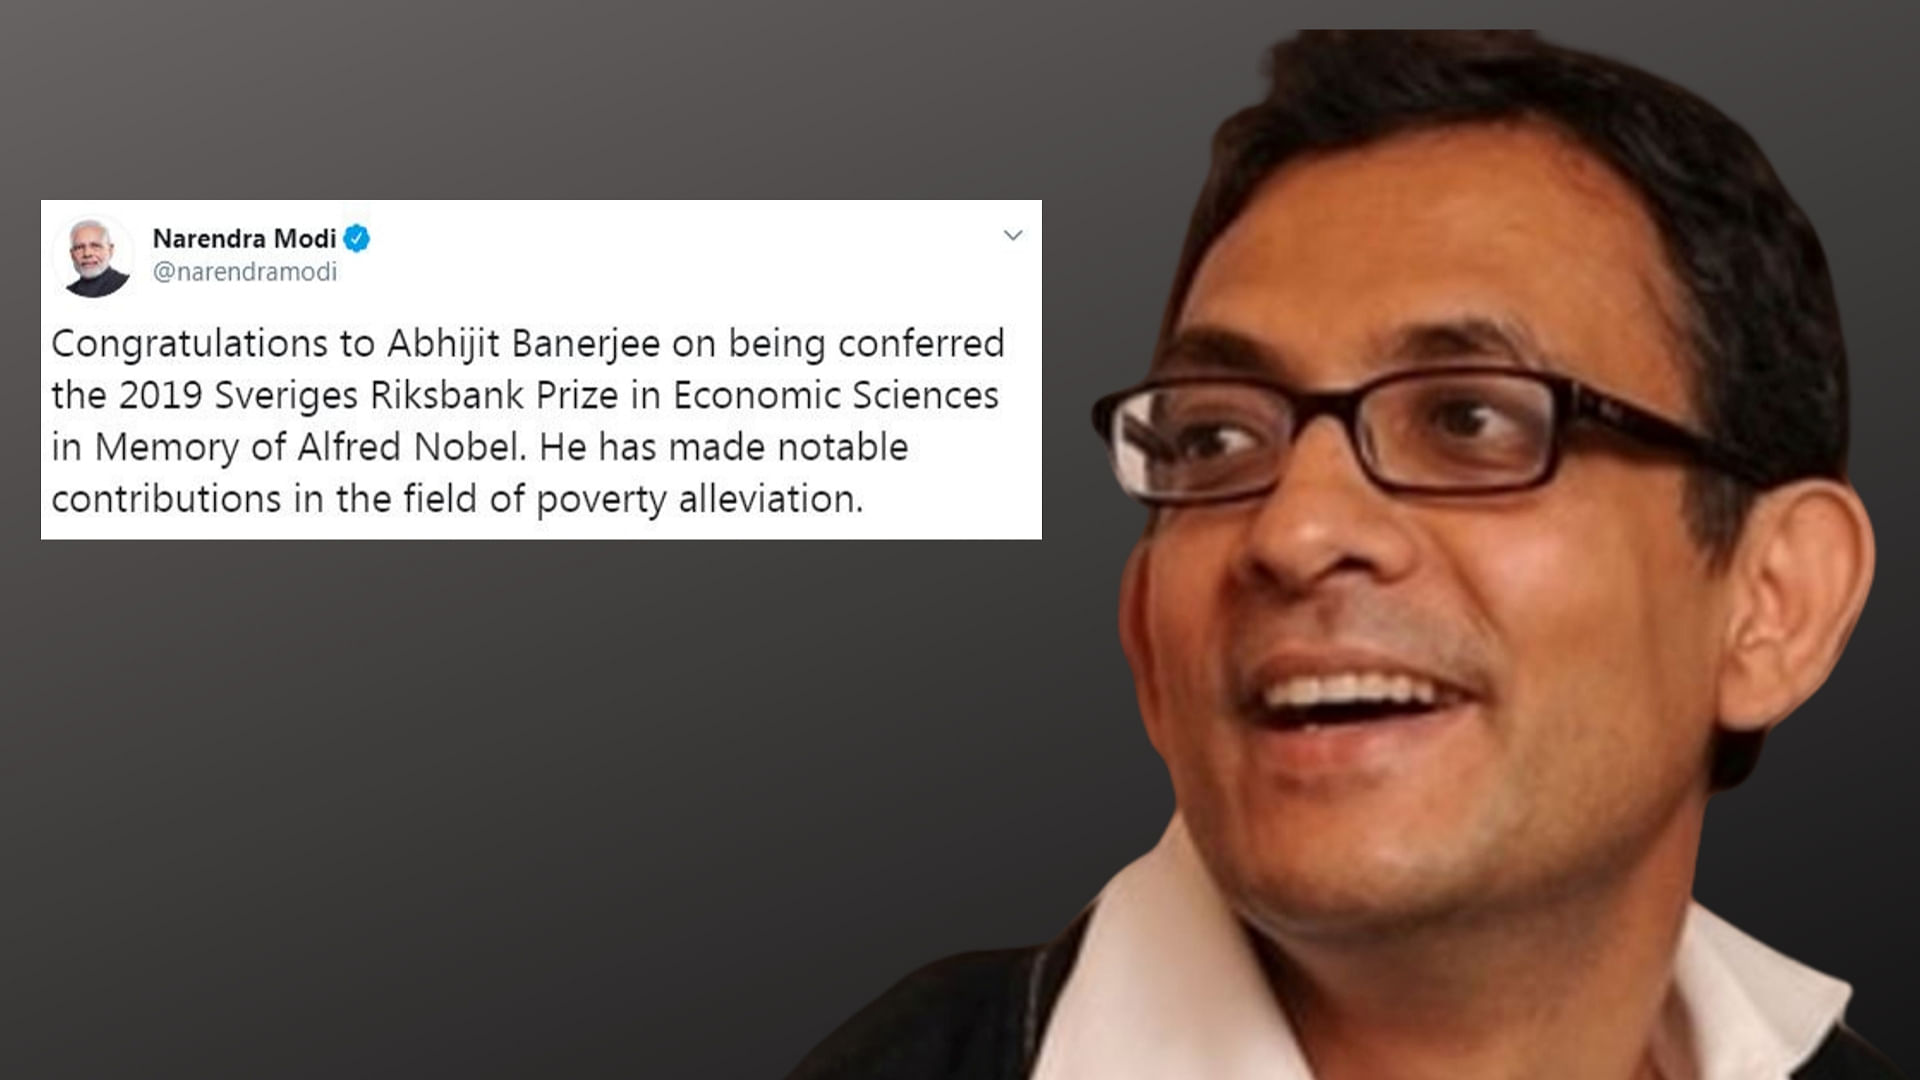 Here’s how politicians on Twitter reacted to Indian-American economist Abhijit Banerjee’s feat.